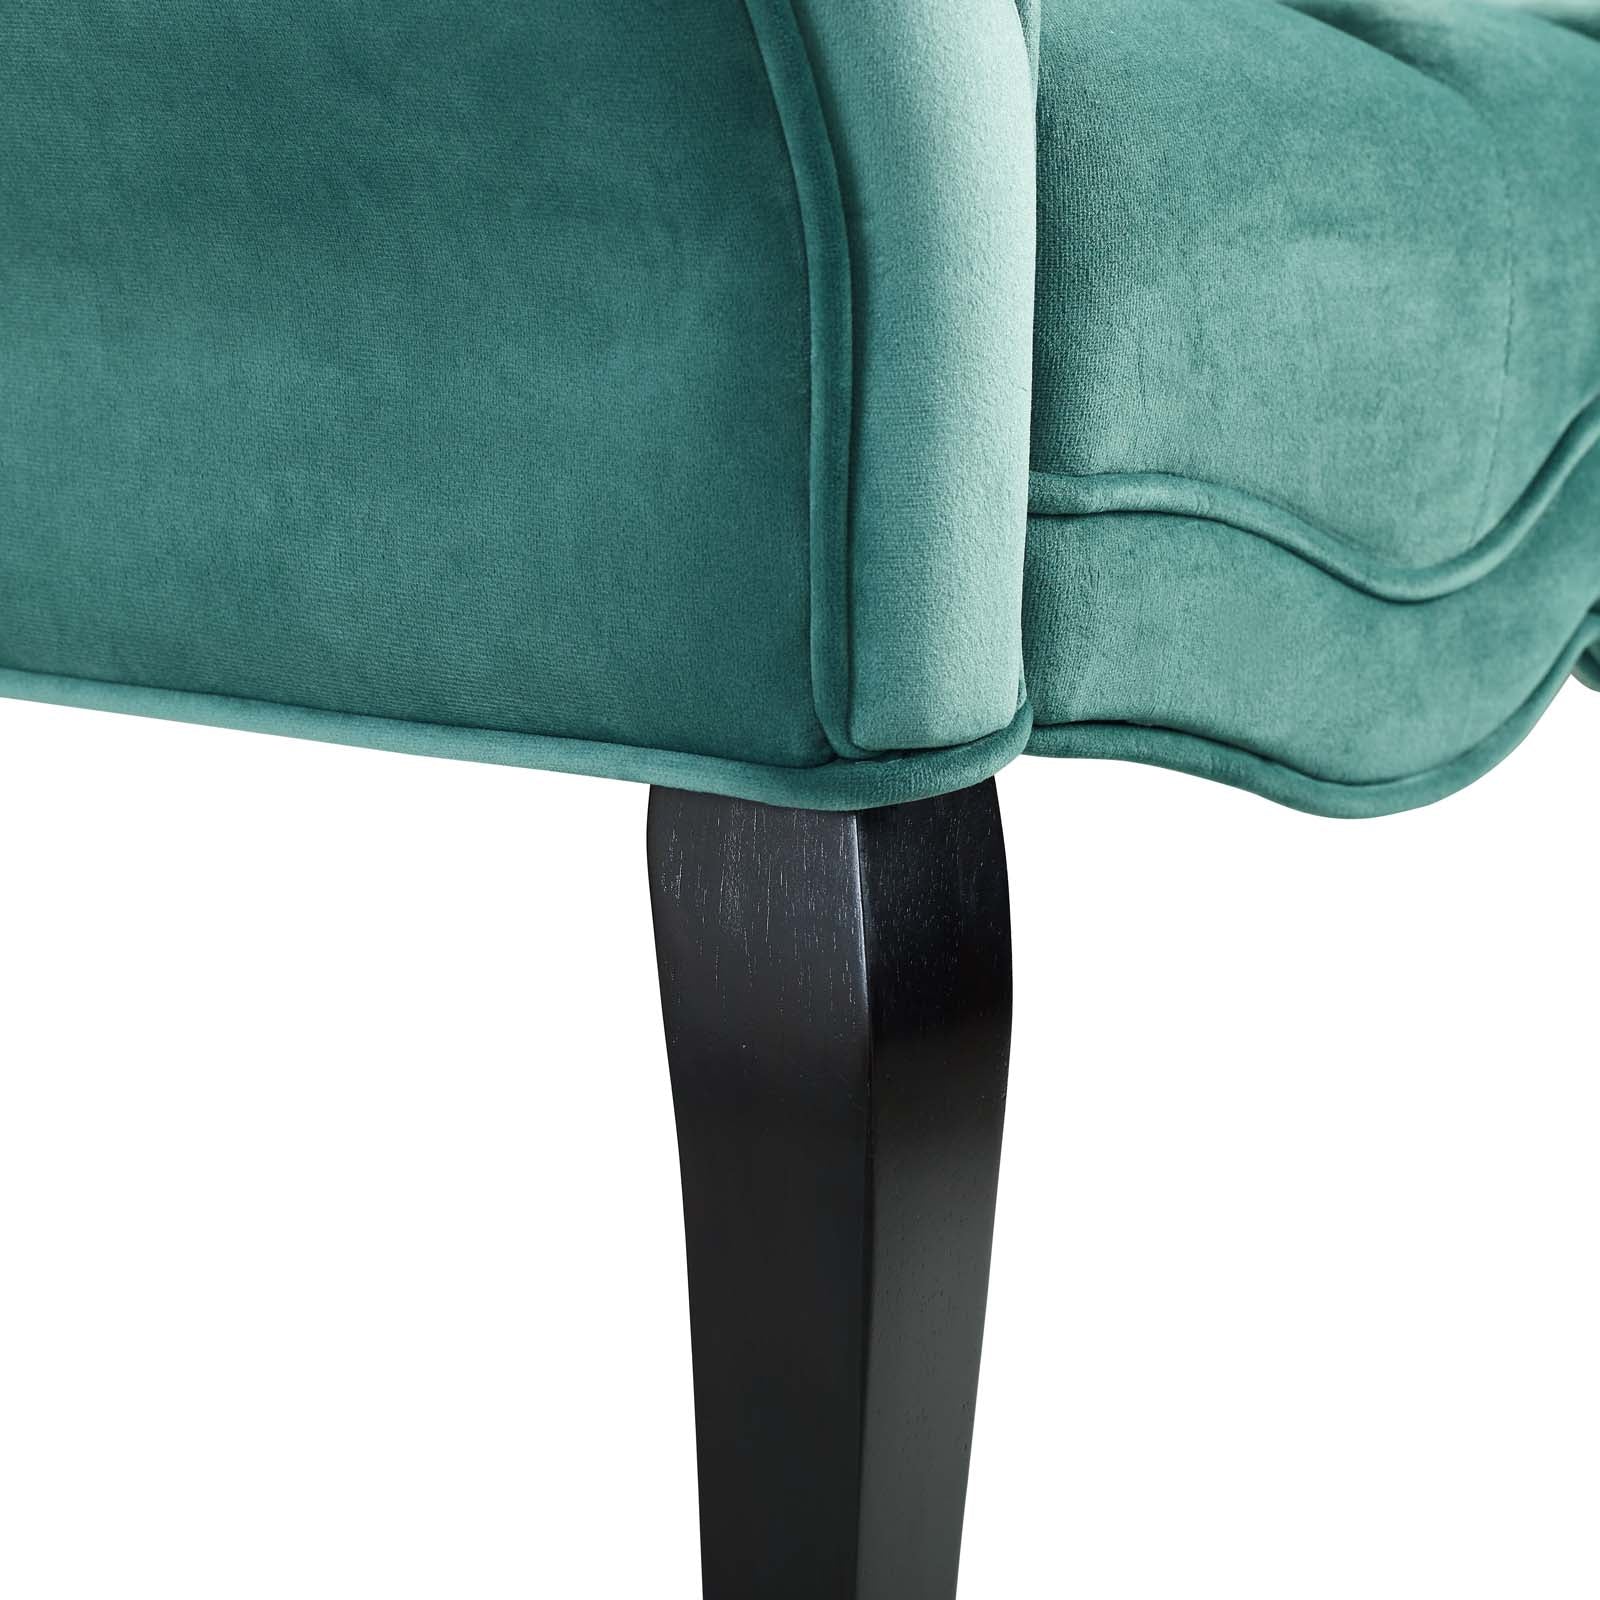 Modway Benches - Adelia Chesterfield Style Button Tufted Performance Velvet Bench Teal